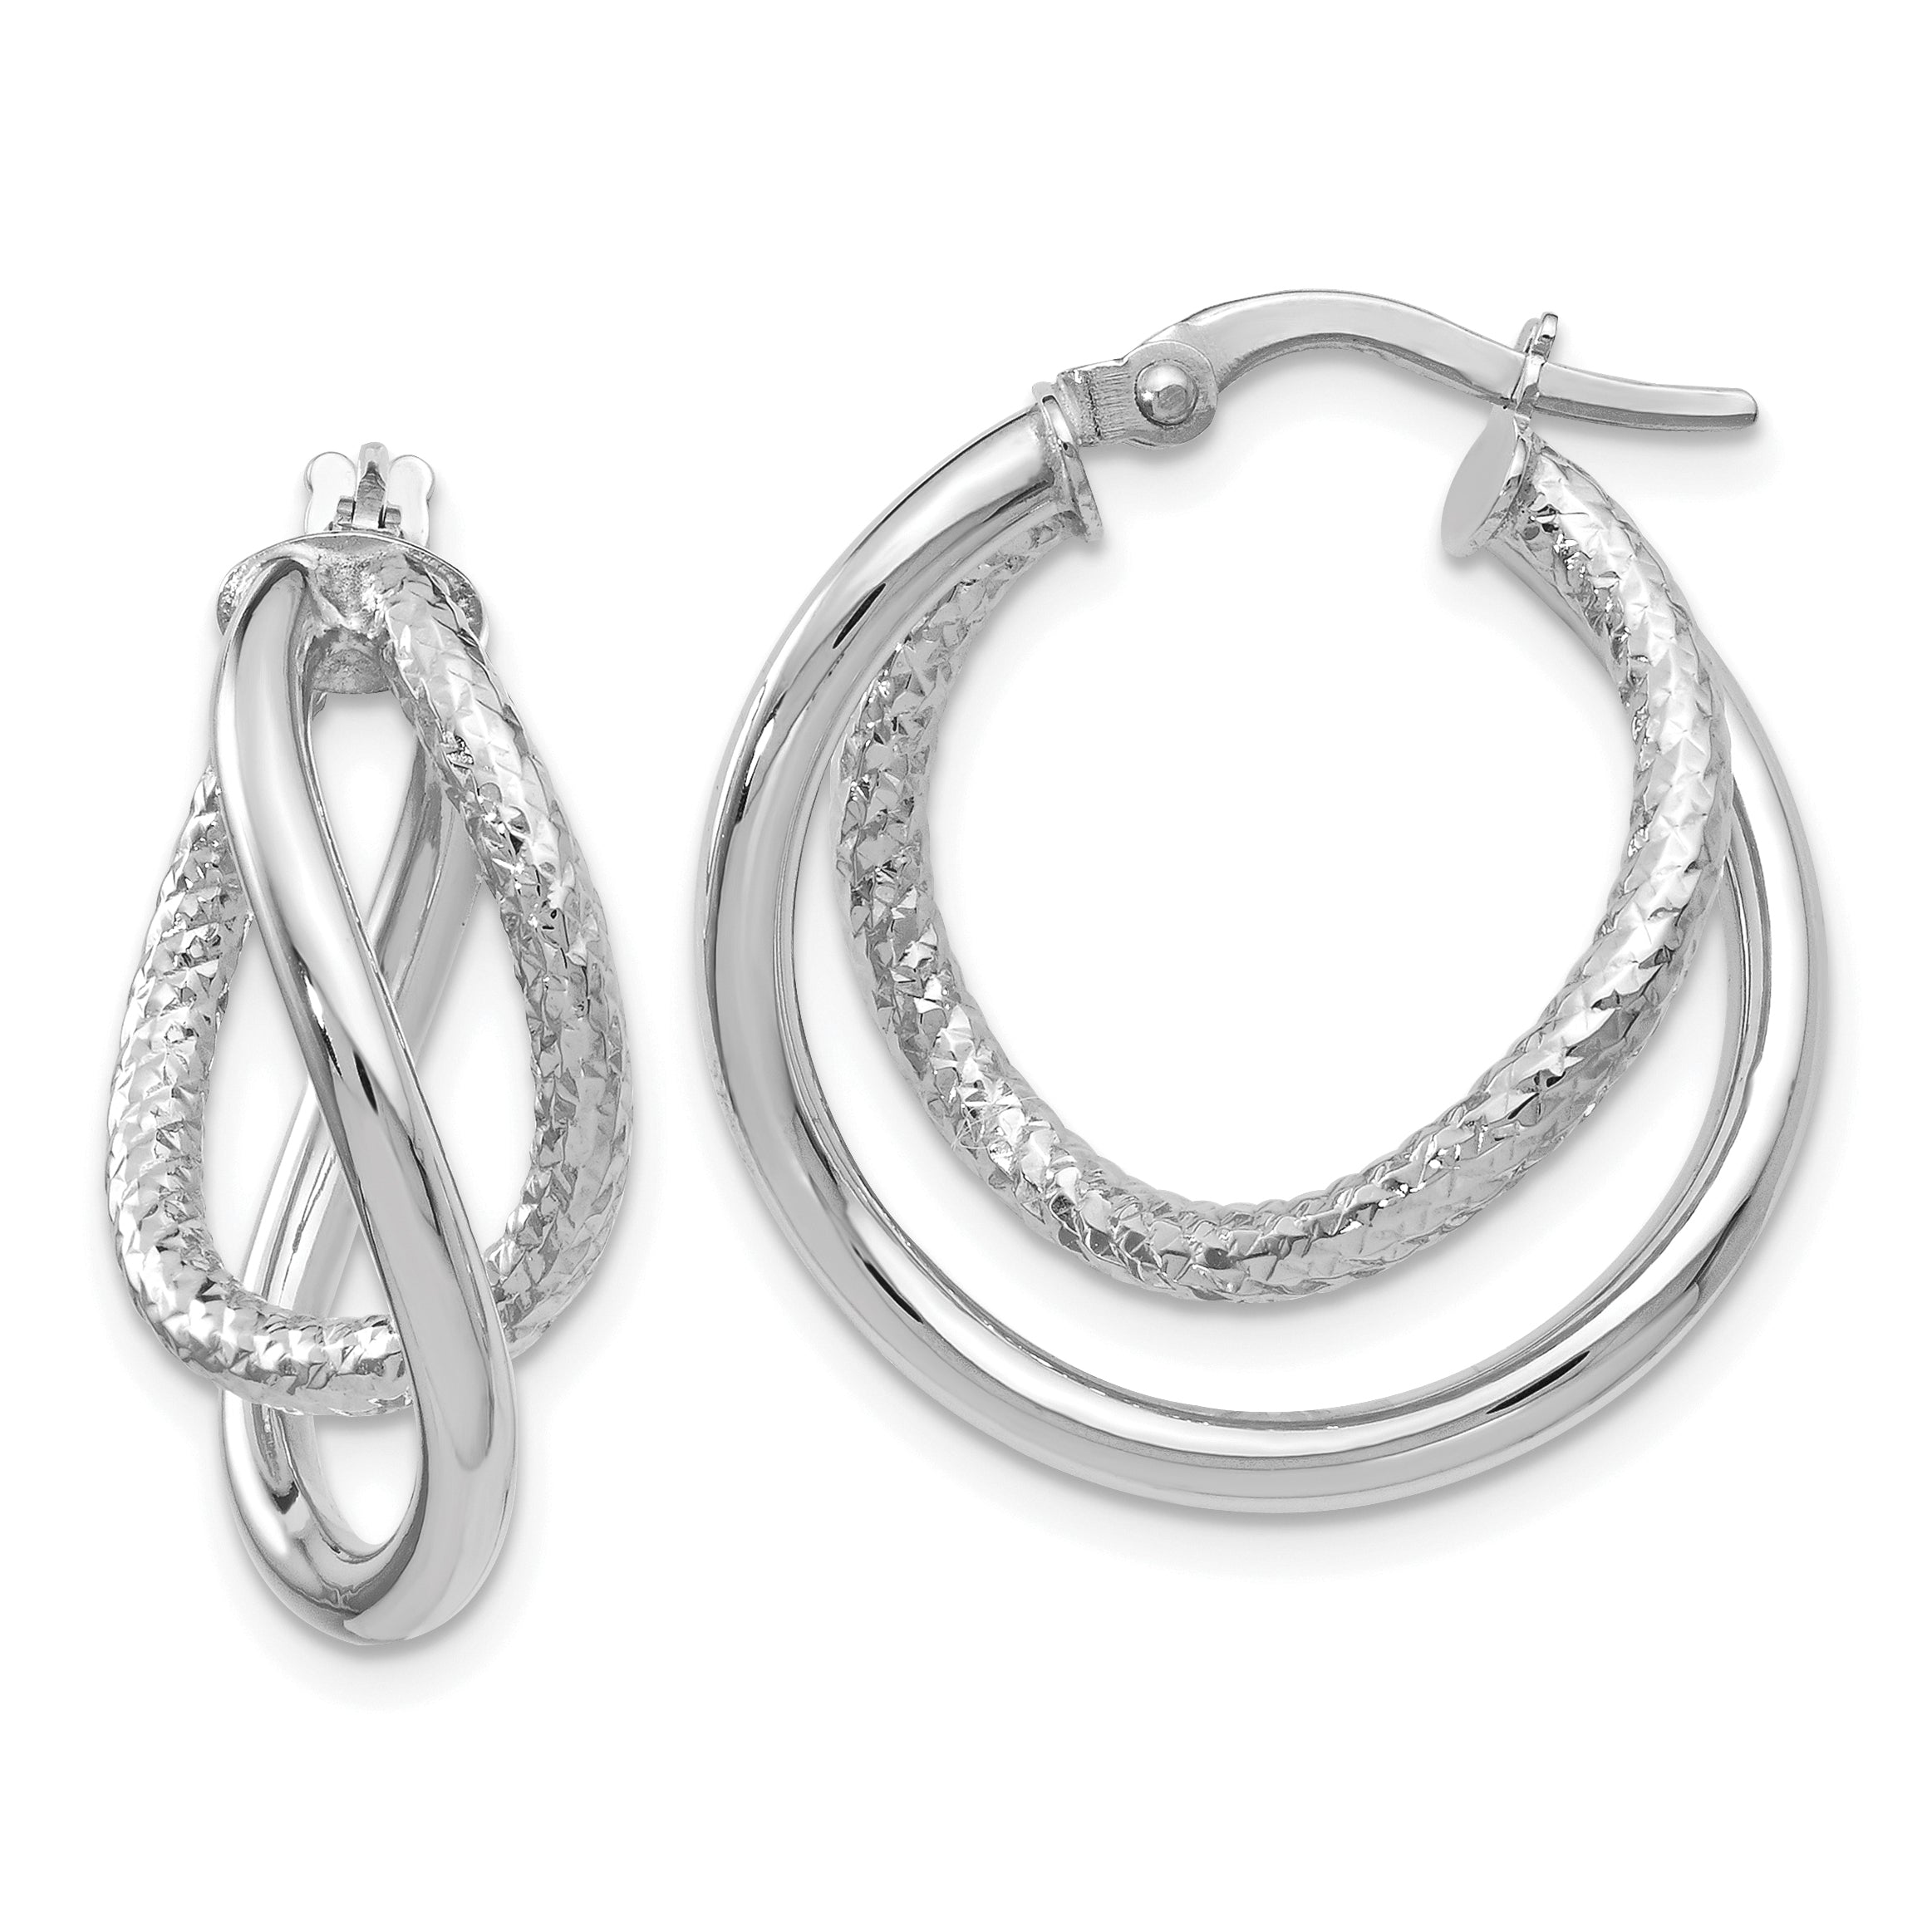 10K White Gold Polished and Textured Fancy Hoop Earrings